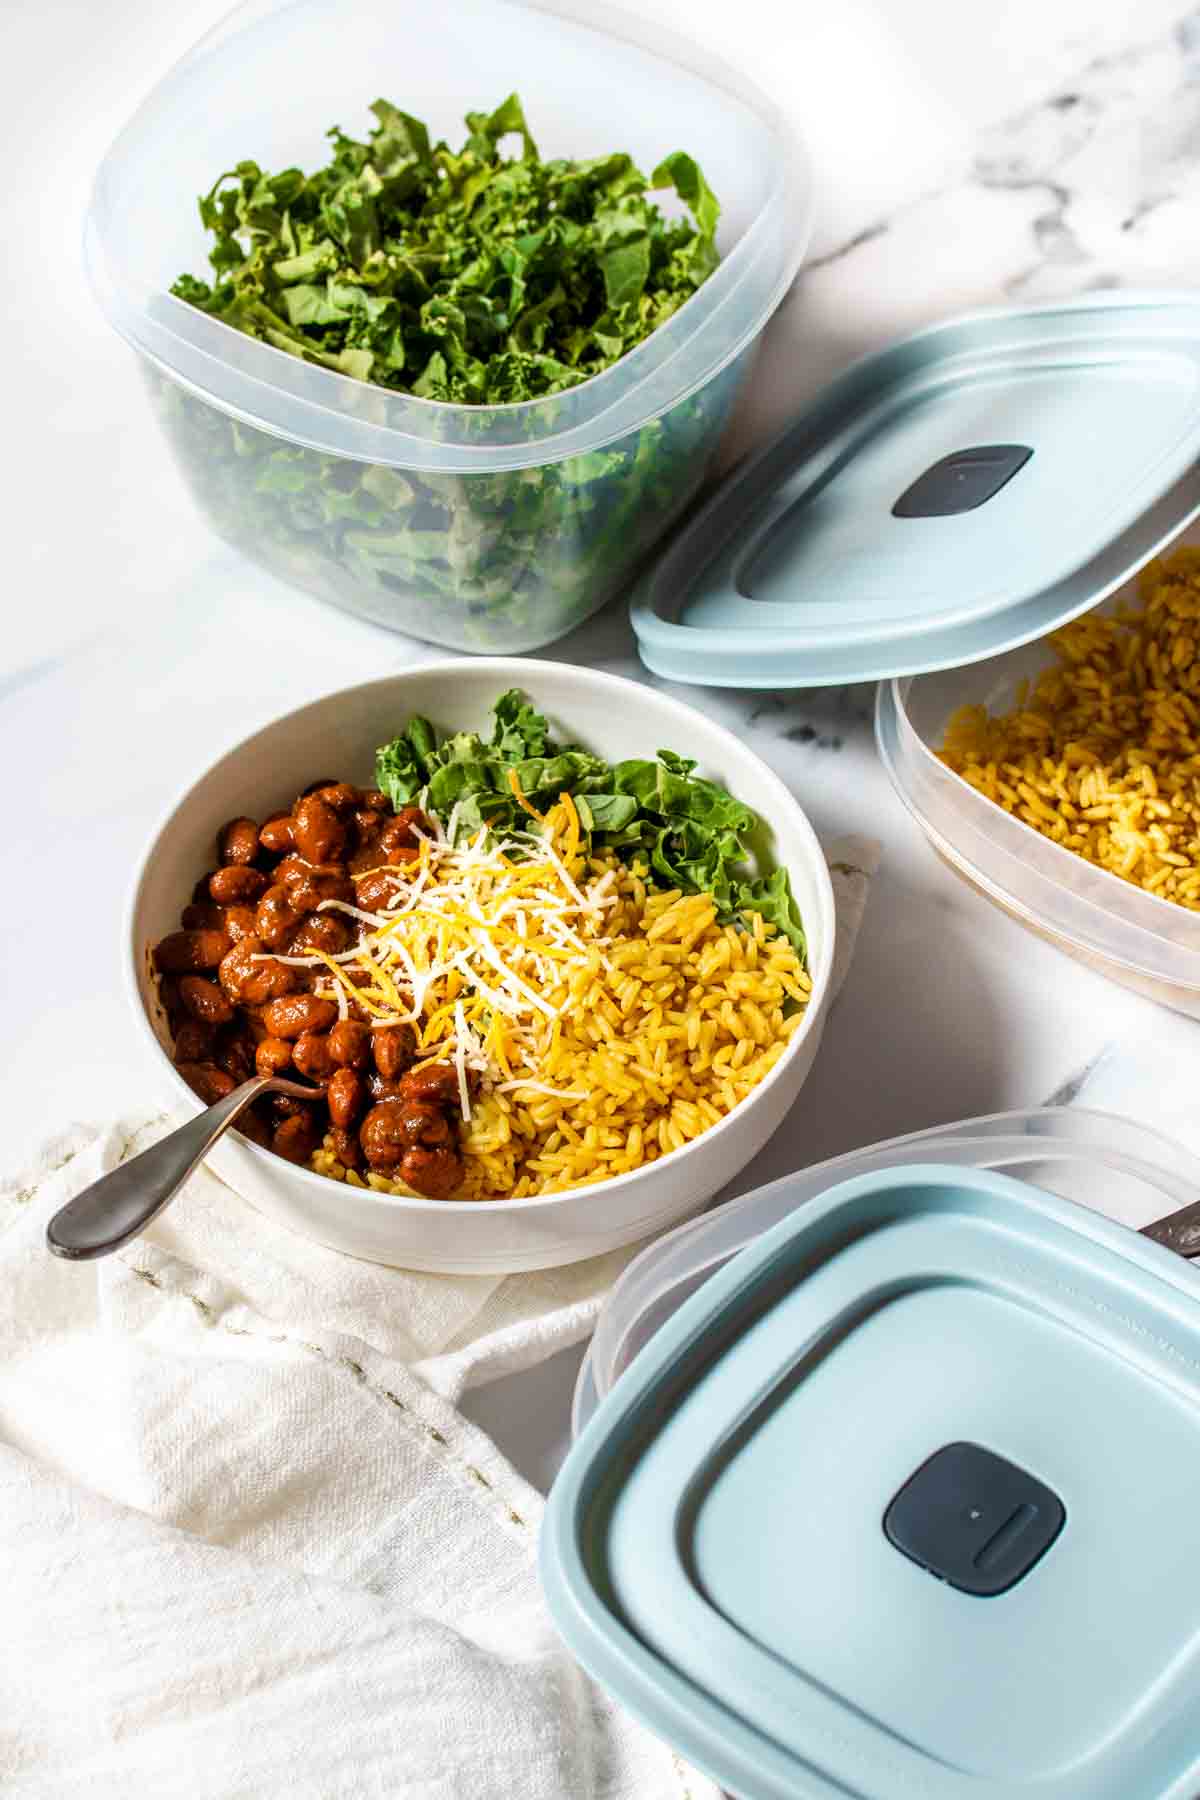 A white bowl with beans, rice and greens inside next to container with blue lids with those items in them.